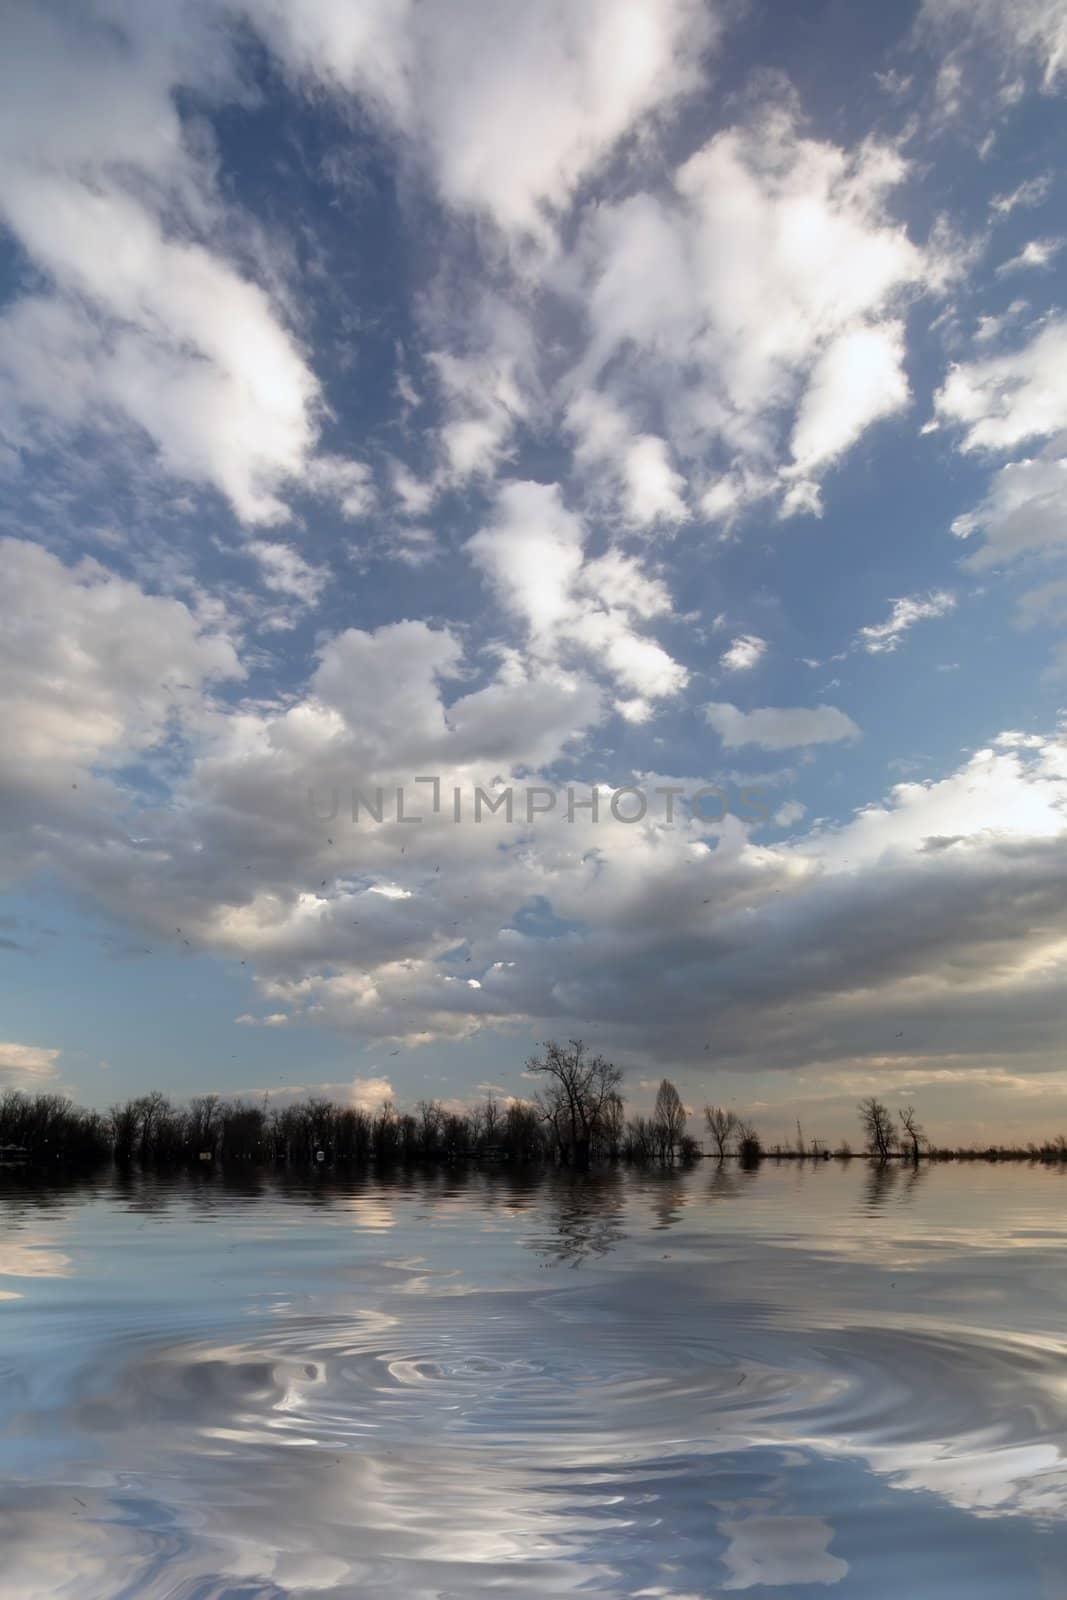 Beautiful sky with clouds and reflection